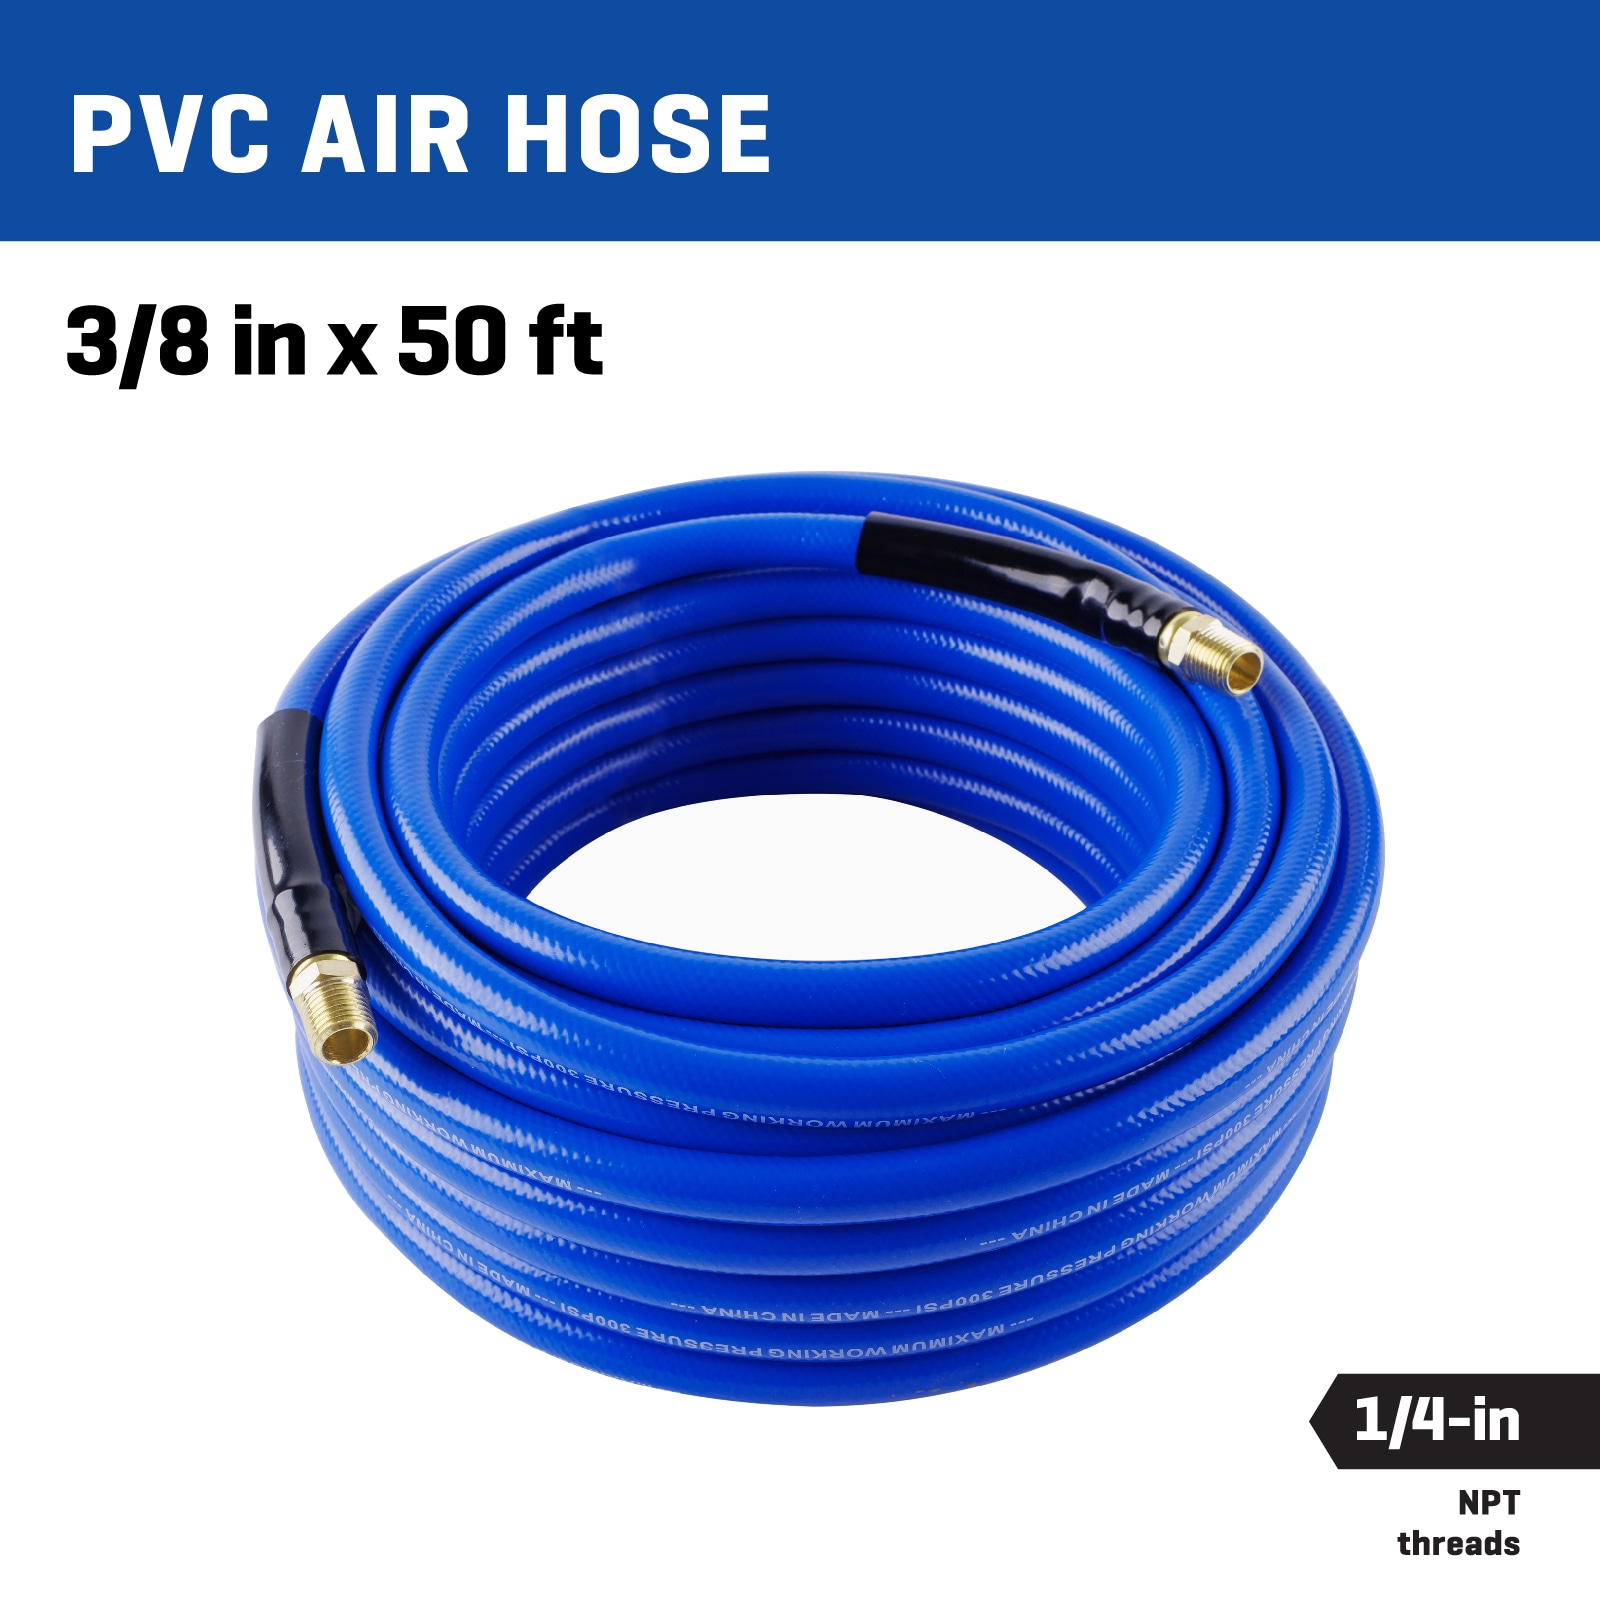 Blue Hybrid Air Hose, 1/4 in ID x 50 ft, 1/4 in MNPT fitting